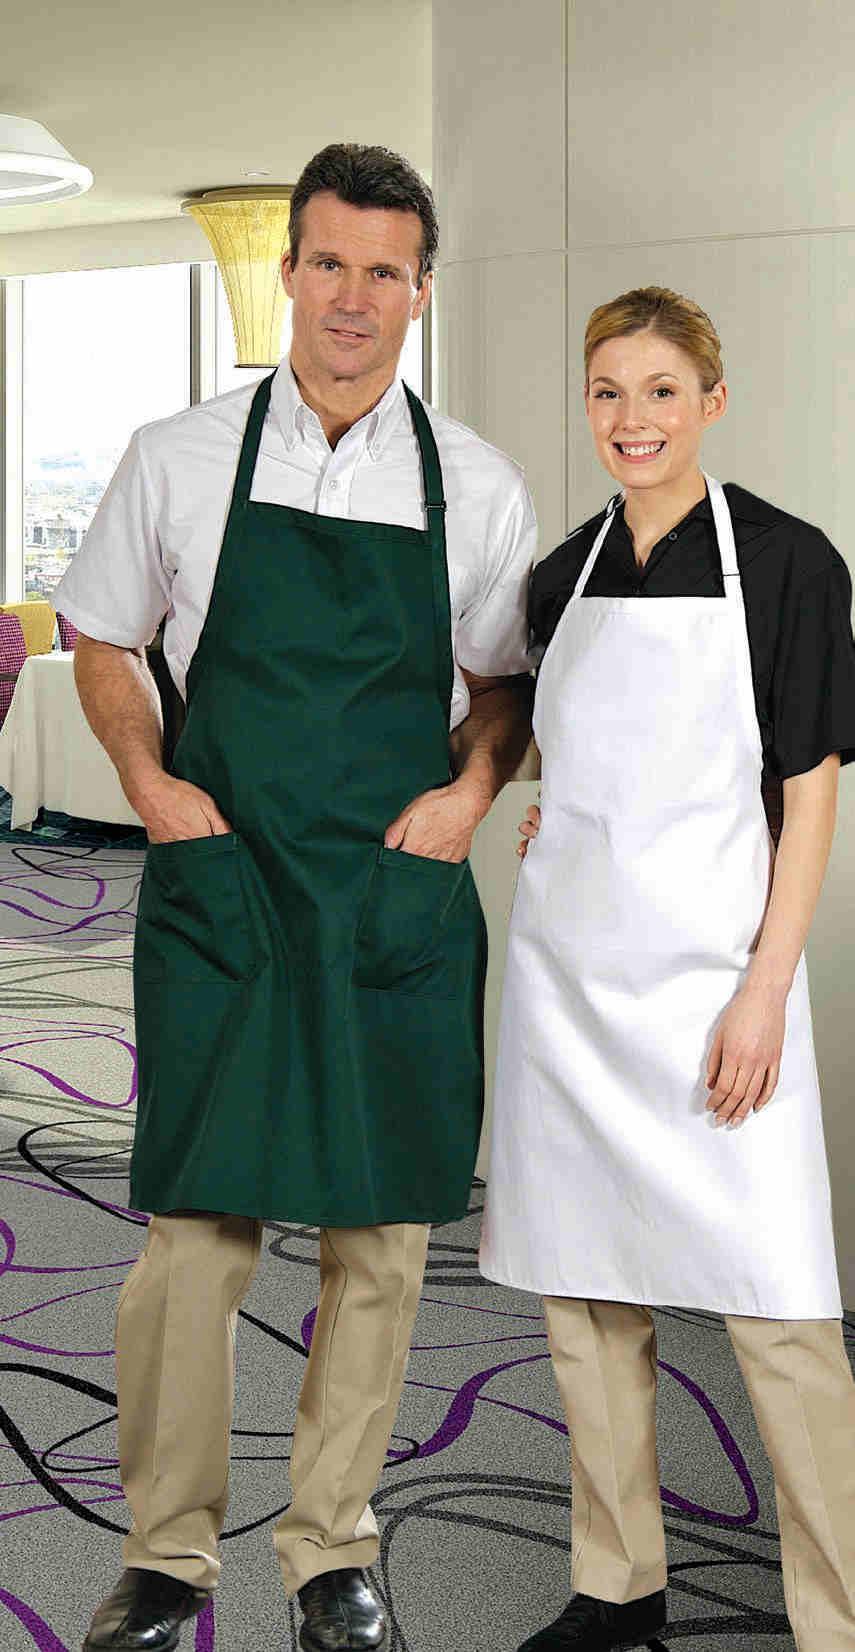 APRONS designer Bib Apron A unique full-length design with adjustable neck band allows for a customized strap length to ensure comfort for both tall and short employees.